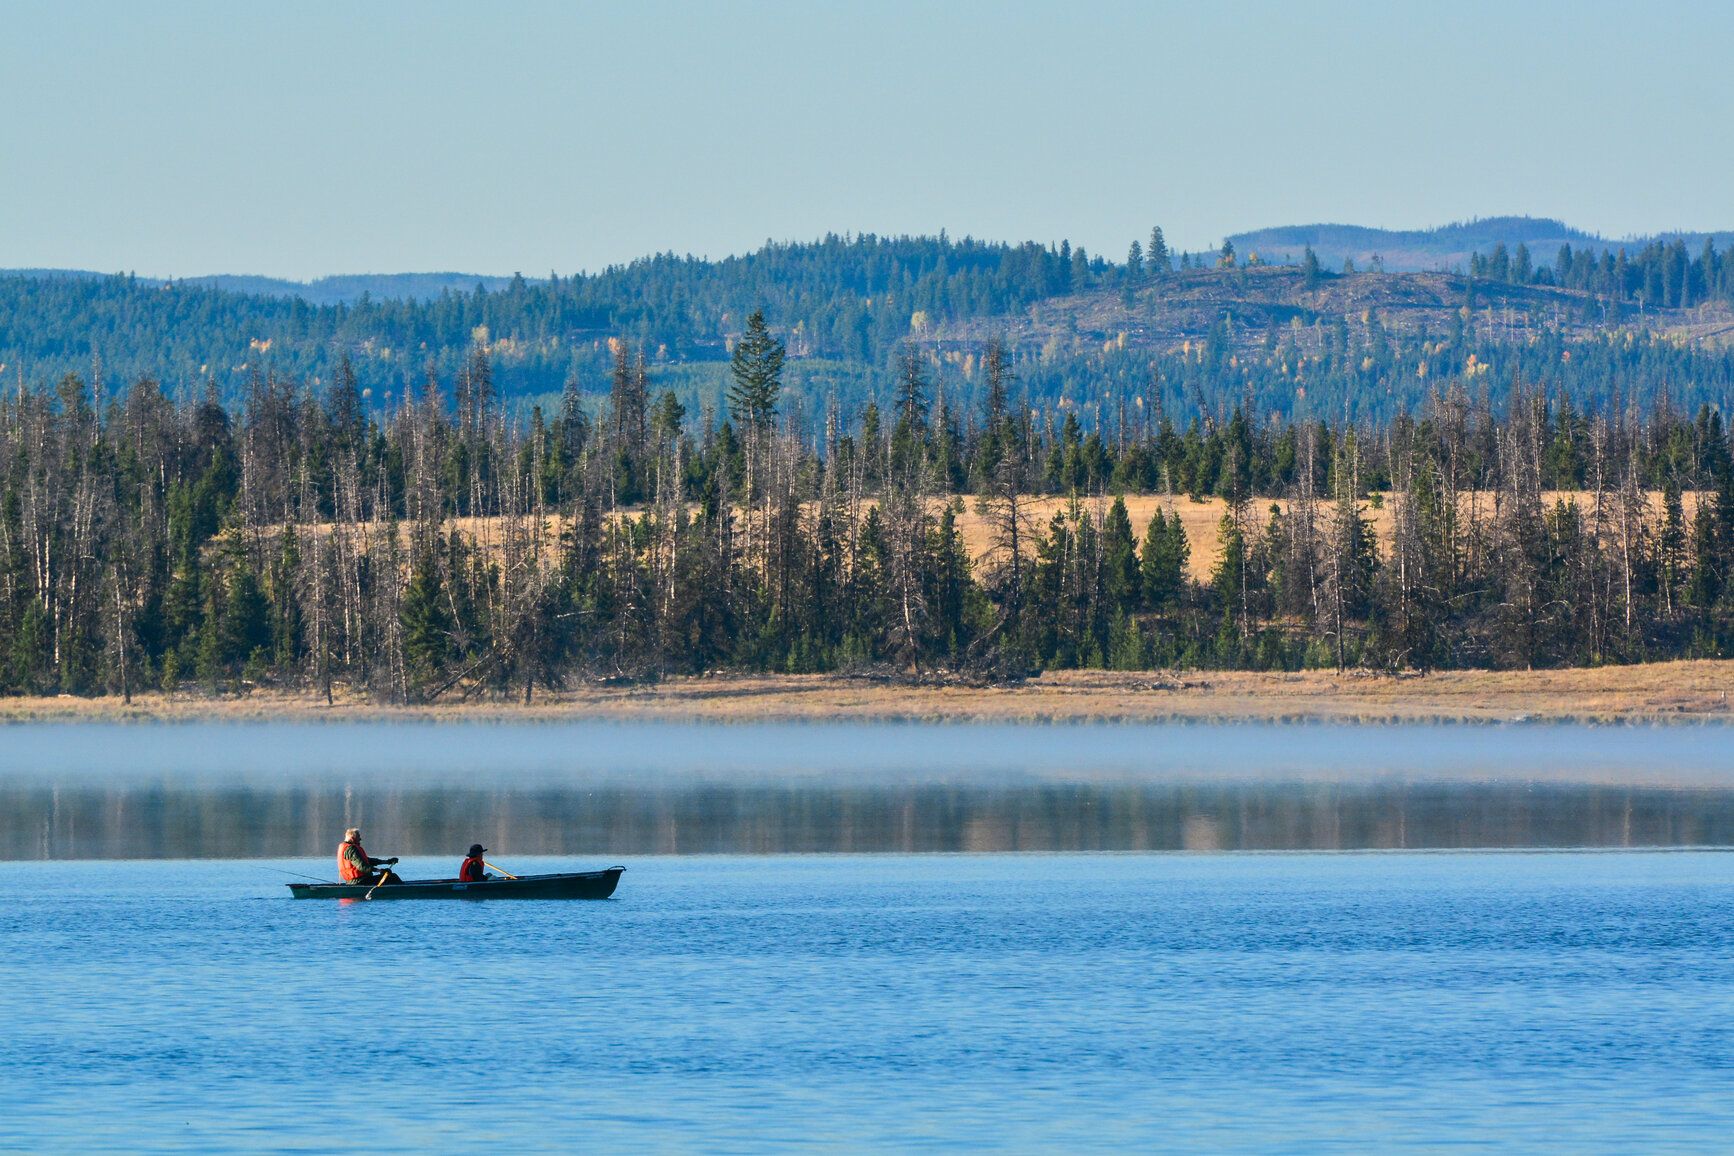 Tunkwa Lake - People canoeing on the lake. Mountains and forest are in the background.